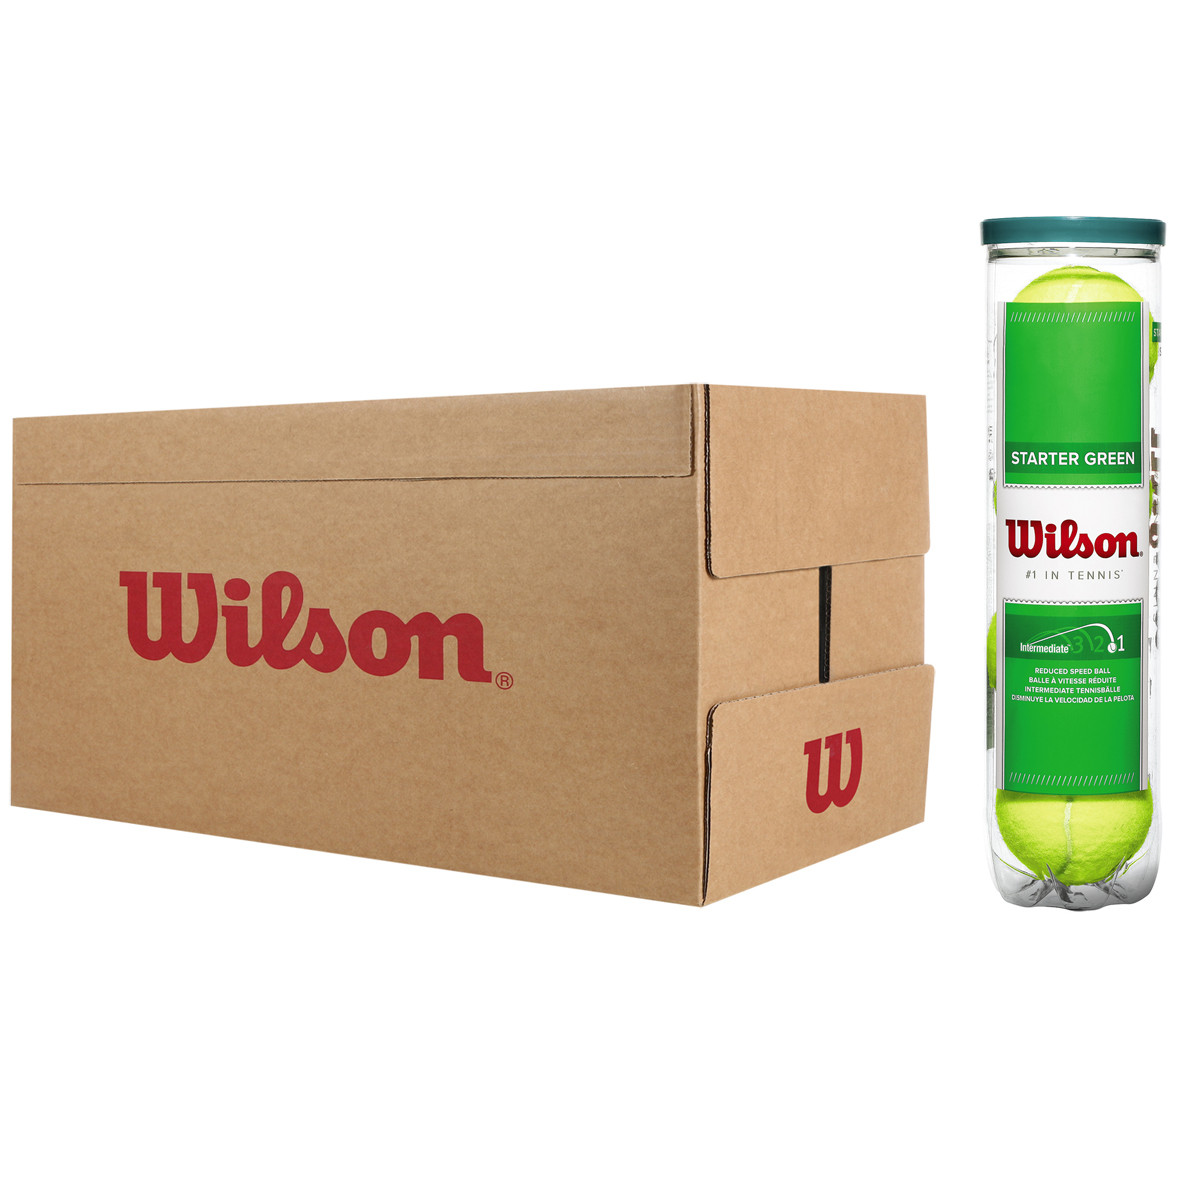 CASE OF 18 CANS OF 4 WILSON STARTER PLAY BALLS